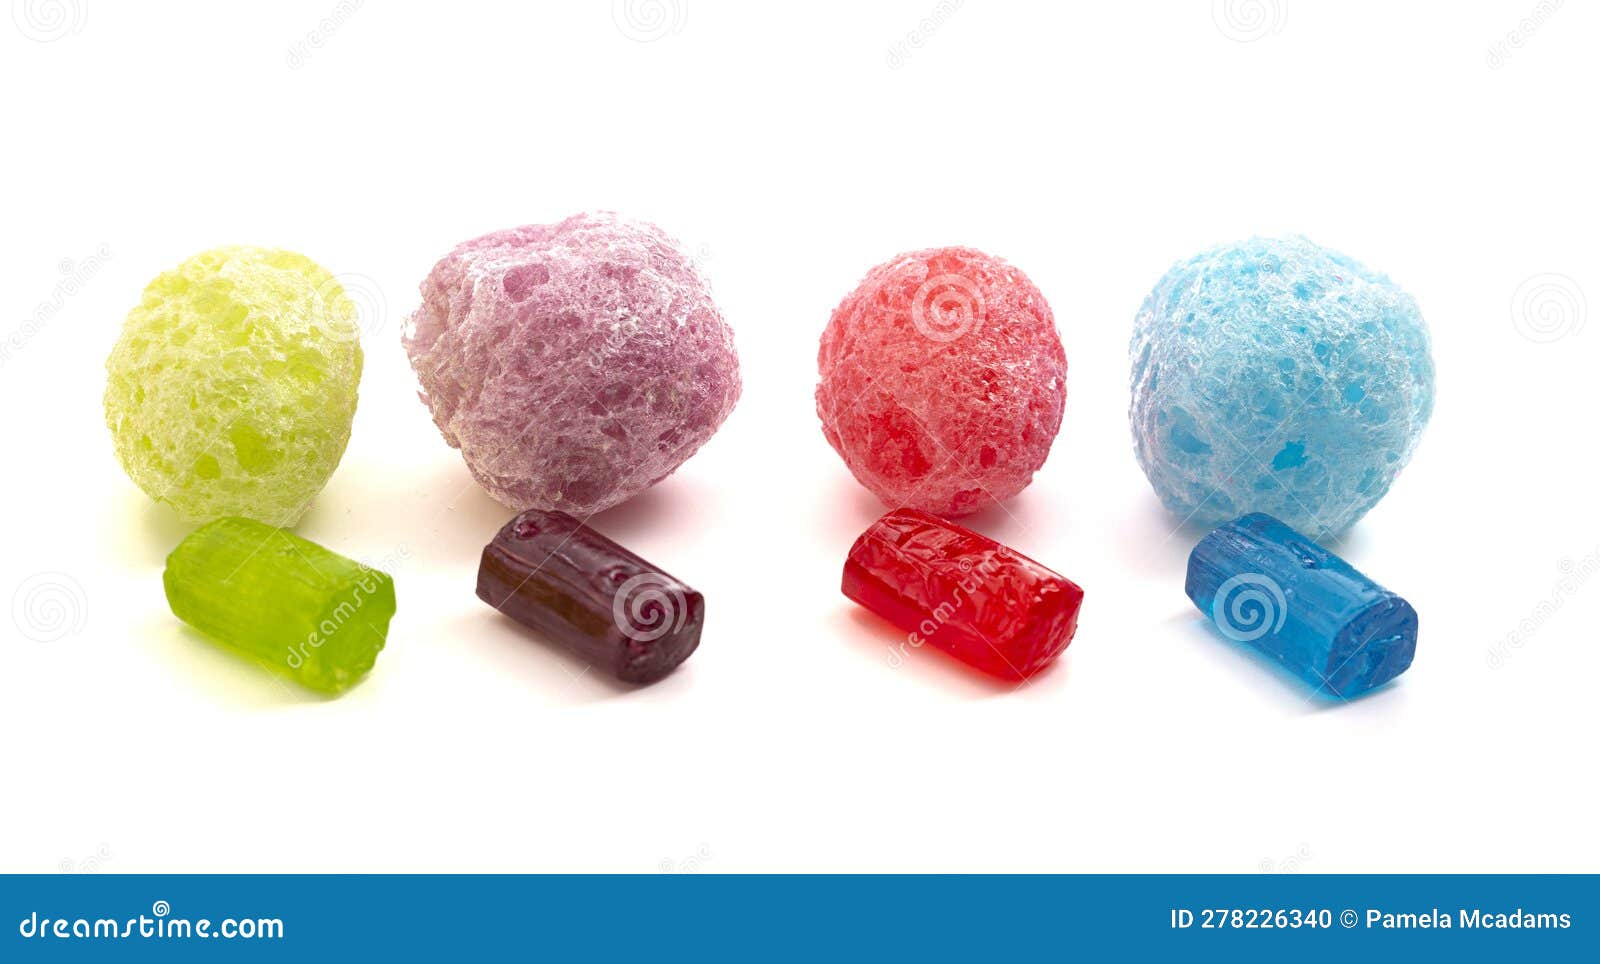 freeze dried fruit flavored candy  on a white background